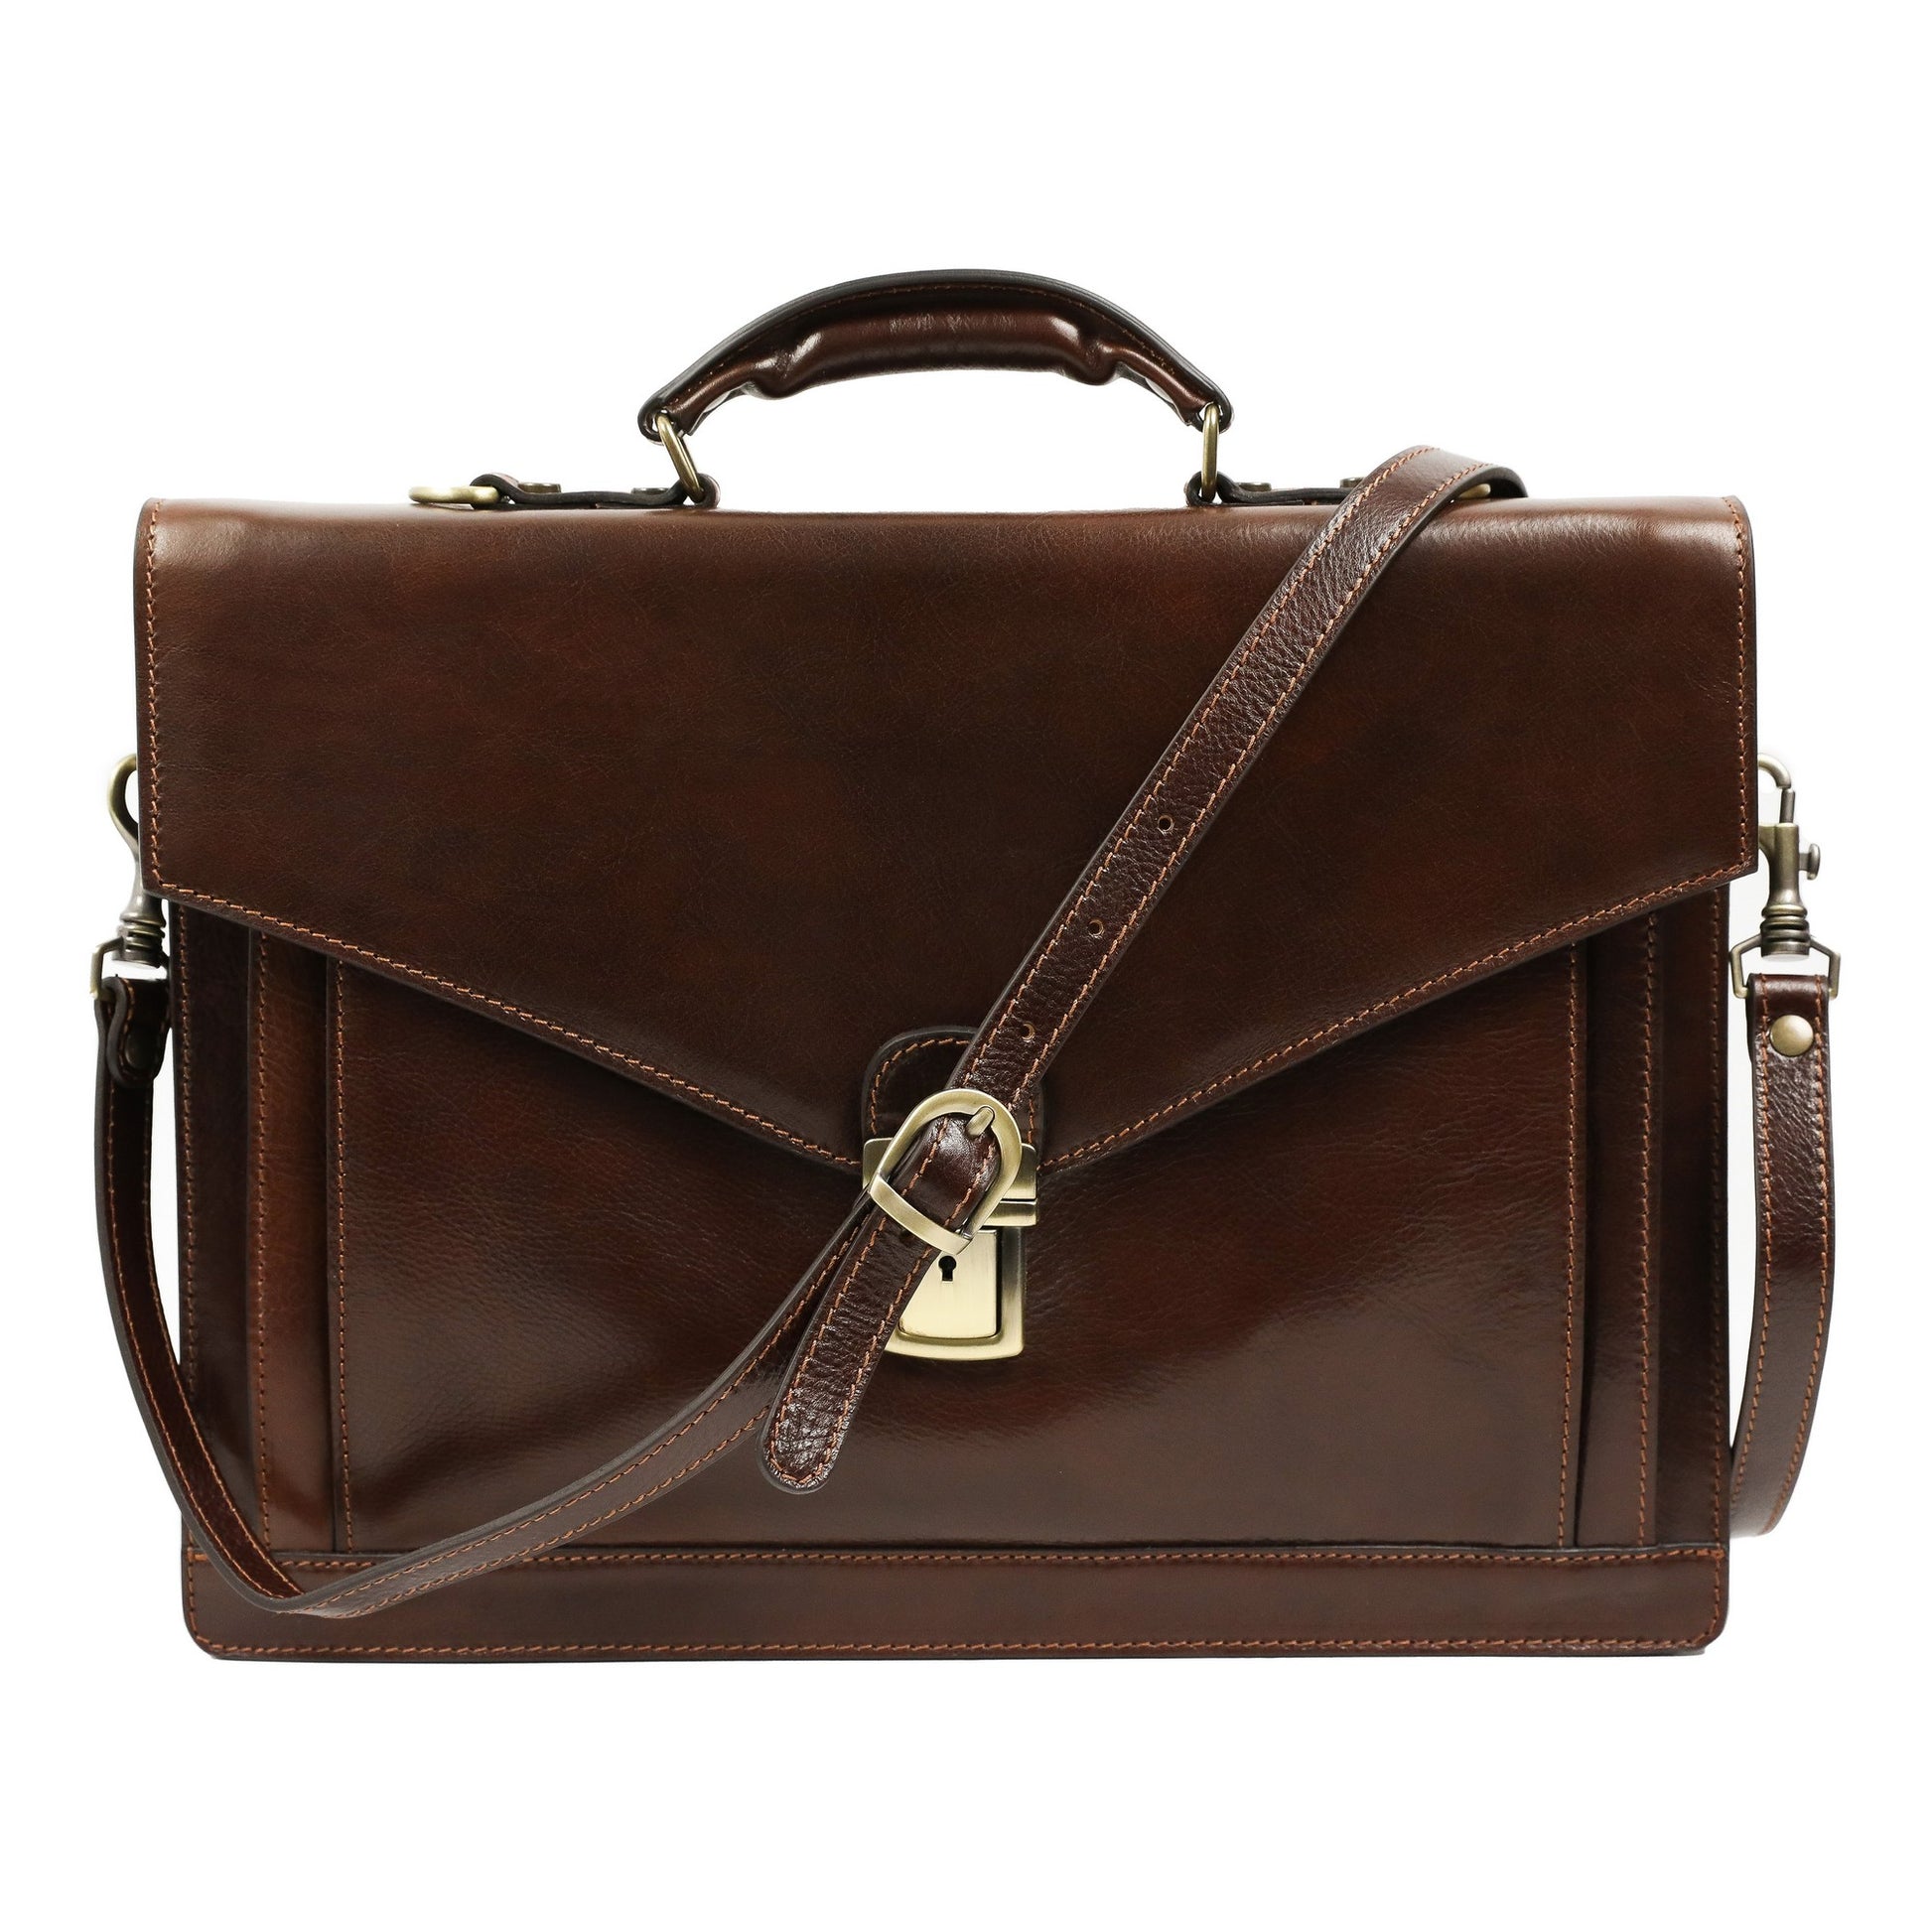 Classic Design Leather Briefcase - The Magus Briefcase Time Resistance   